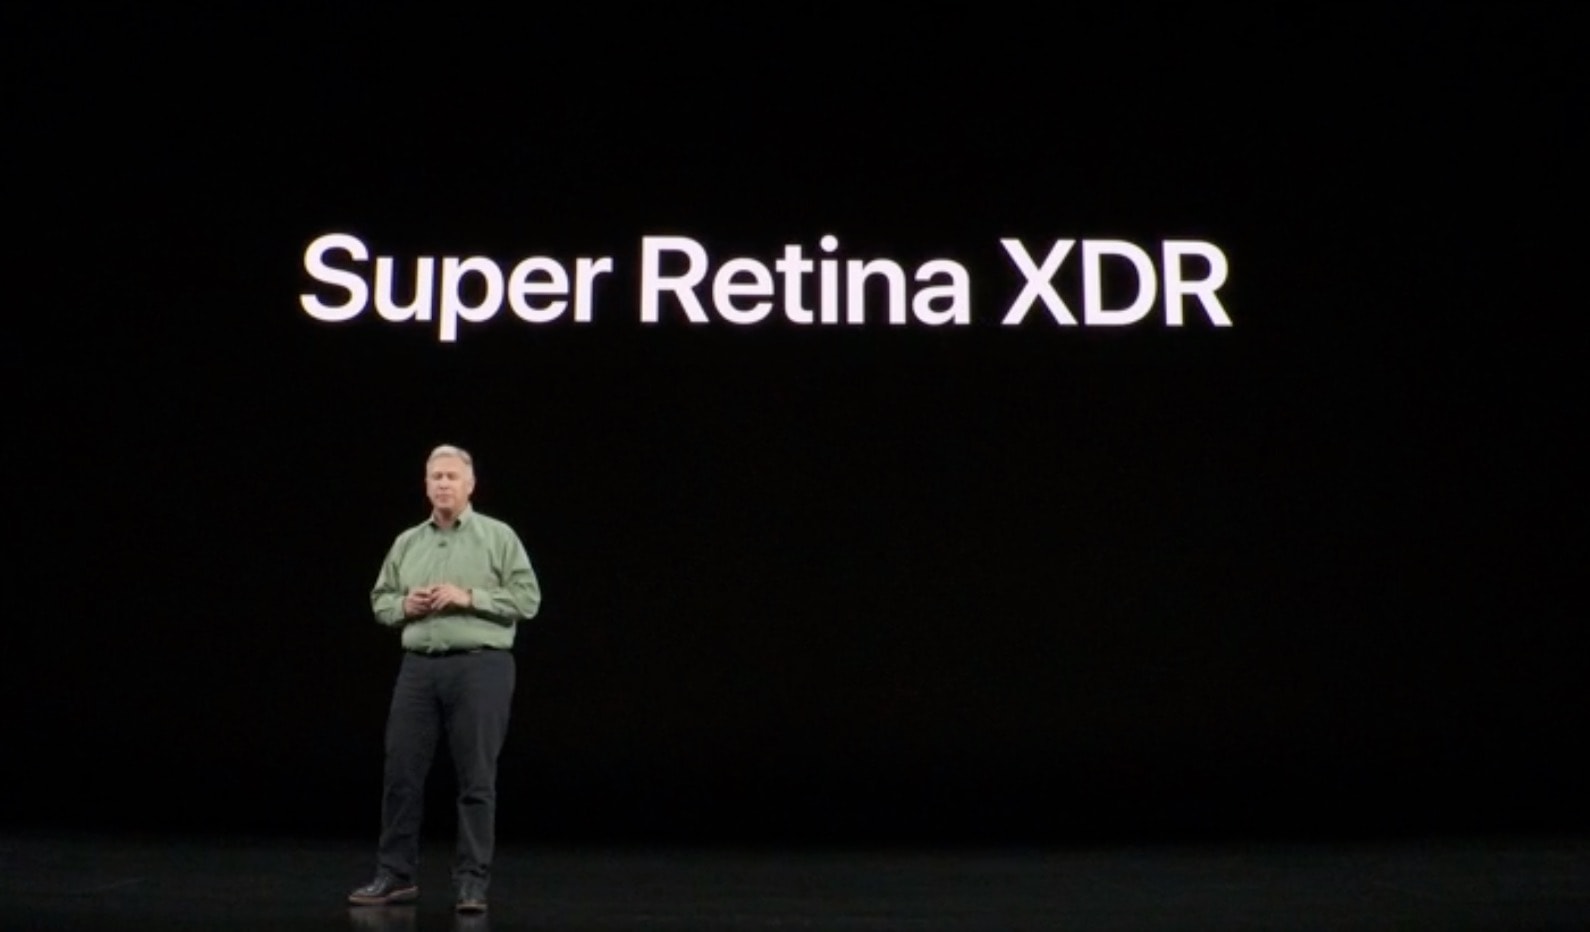 The Super Retina XDR display is the best iPhone display ever built